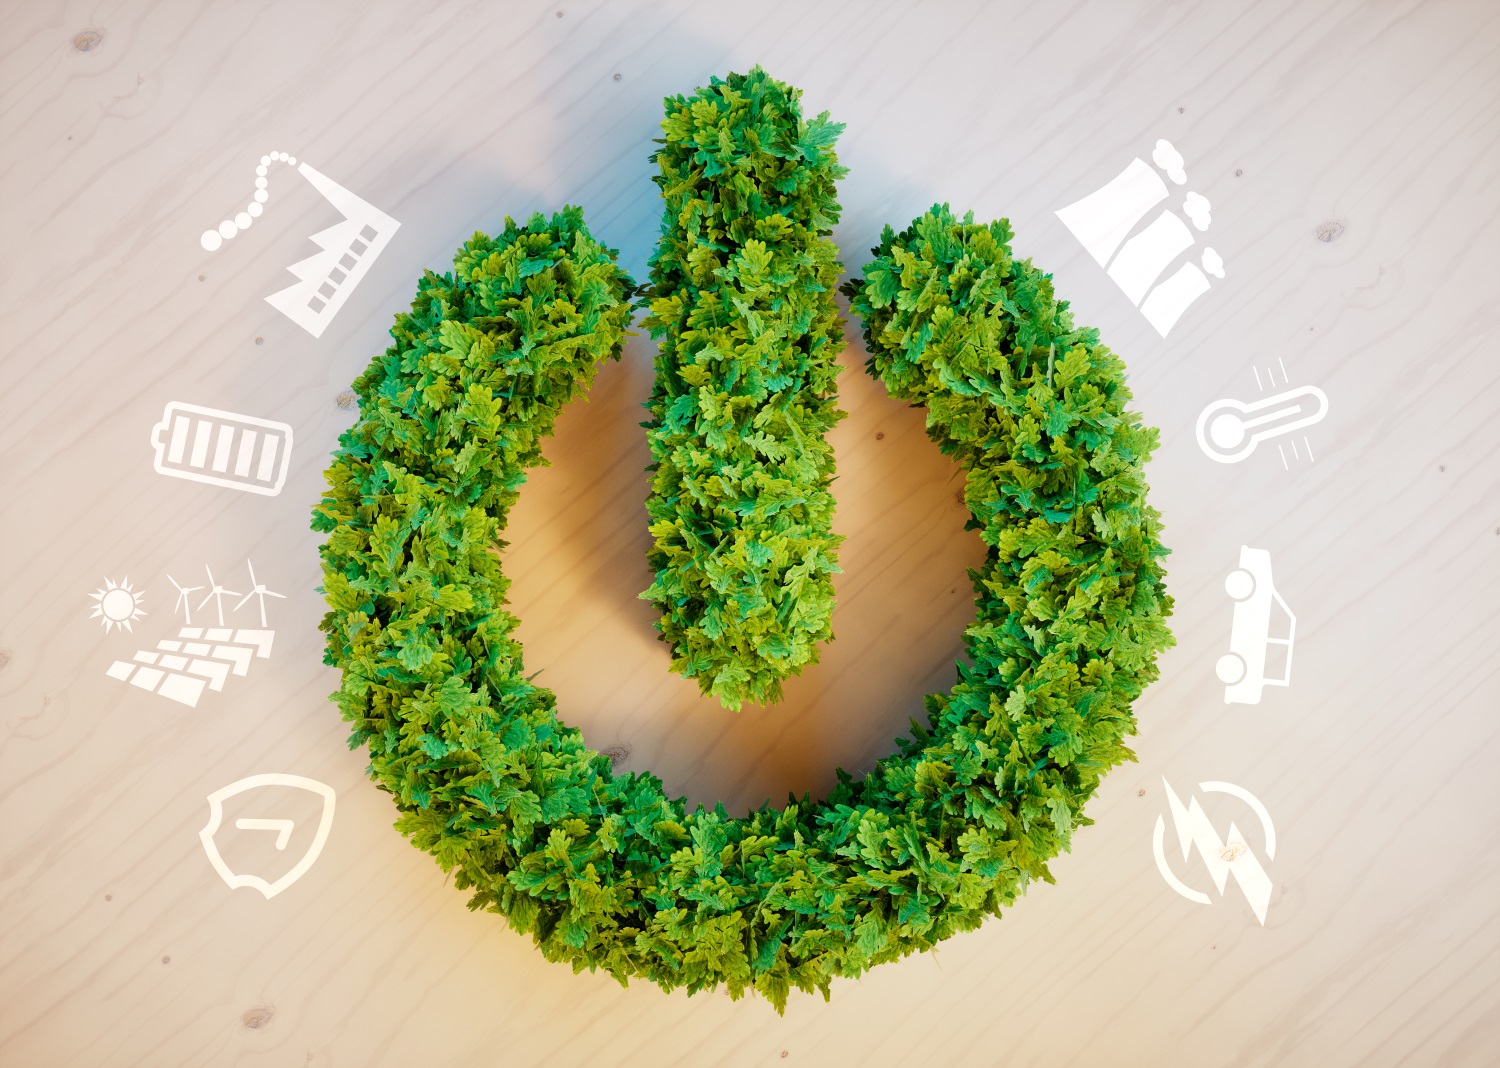 sustainability - green on and off switch